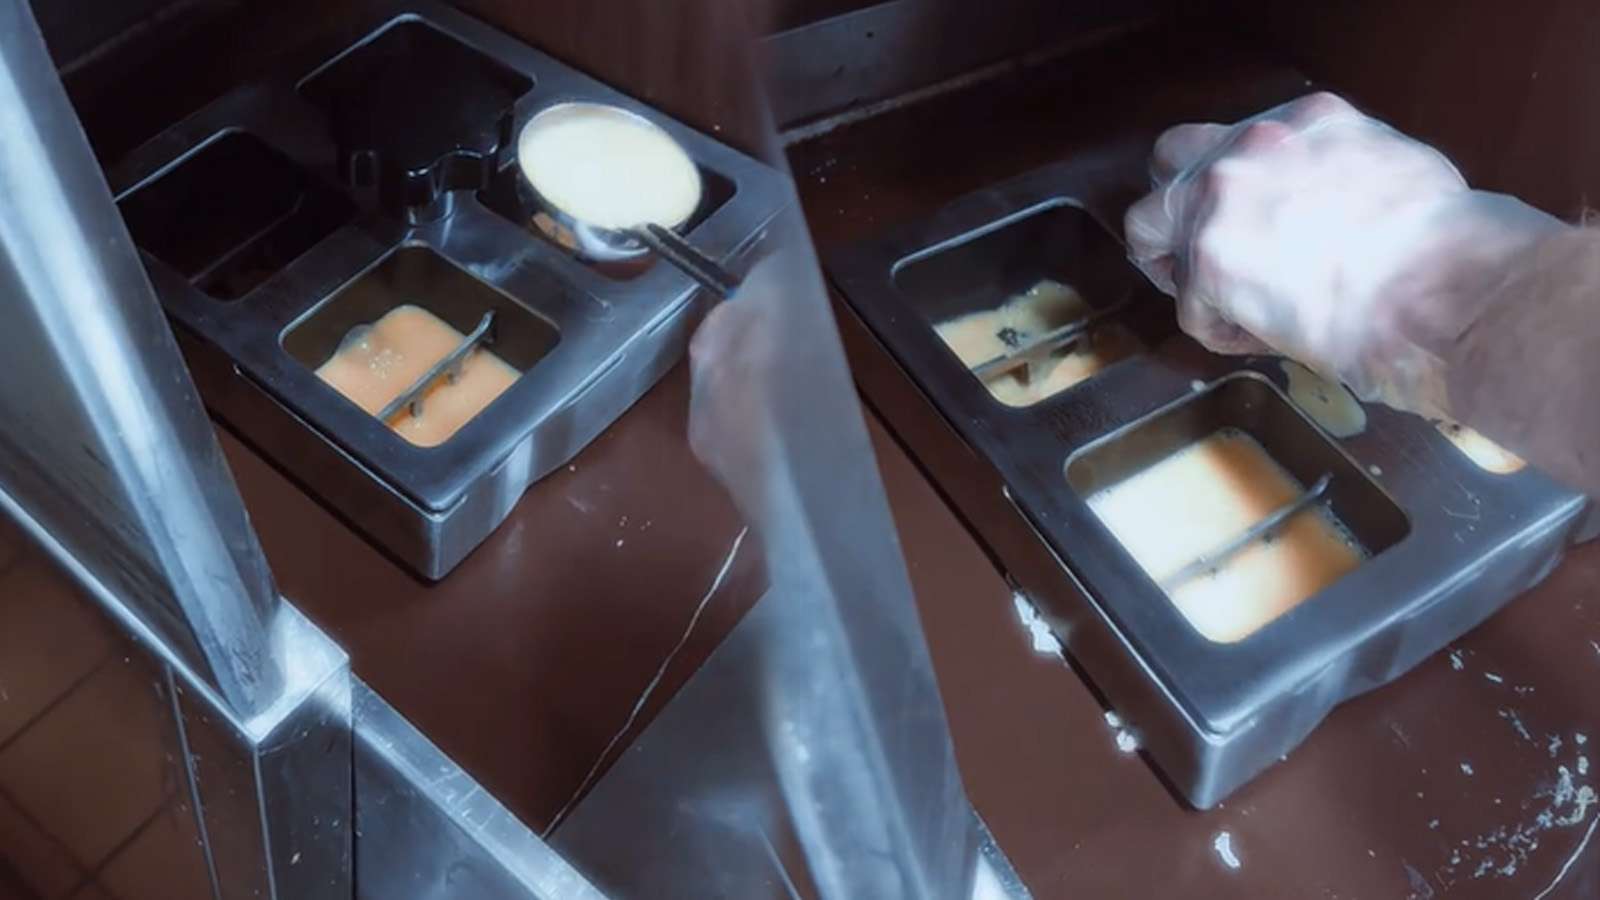 McDonald's worker baffles viewers with bizarre device to scramble eggs